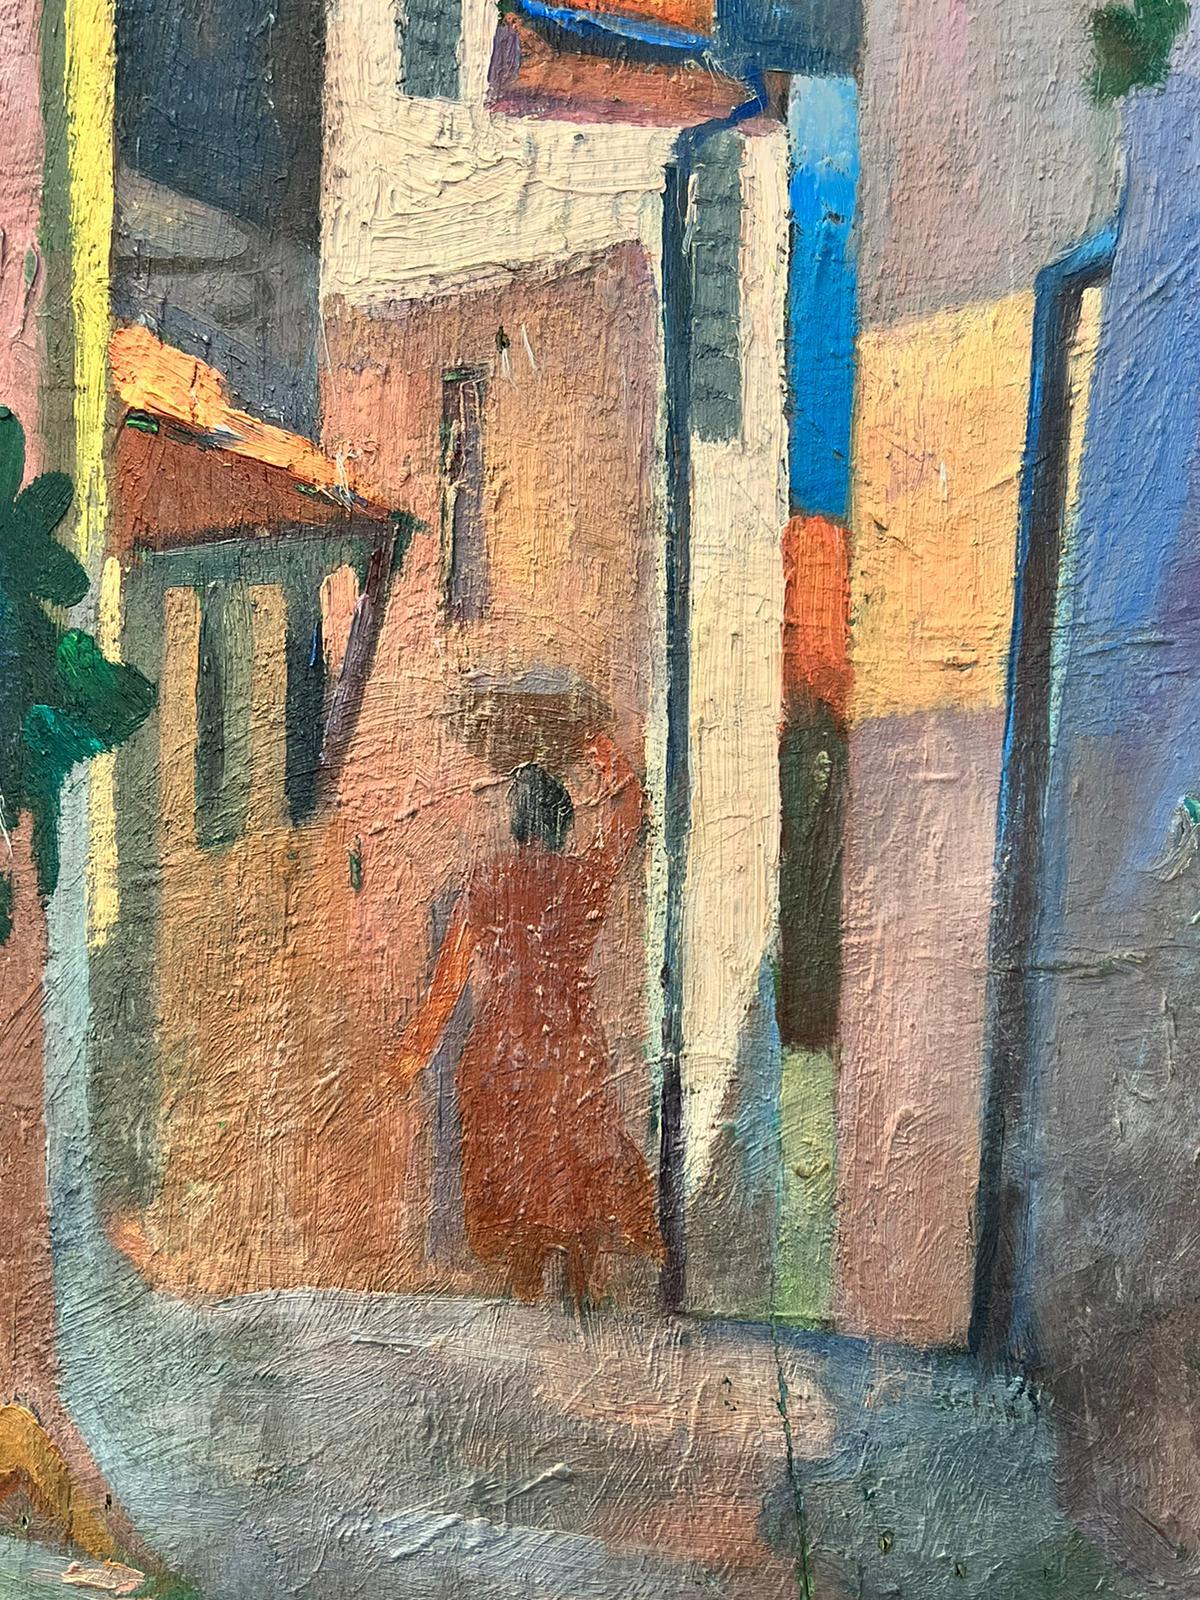 Artist/ School: Suzanne Crochet (French c. 1930 female French Impressionist artist)

Title: The Old Provencal Village

Medium: oil on board, unframed 

board: 13 x 9 inches

Provenance: private collection, France

Condition: The painting is in